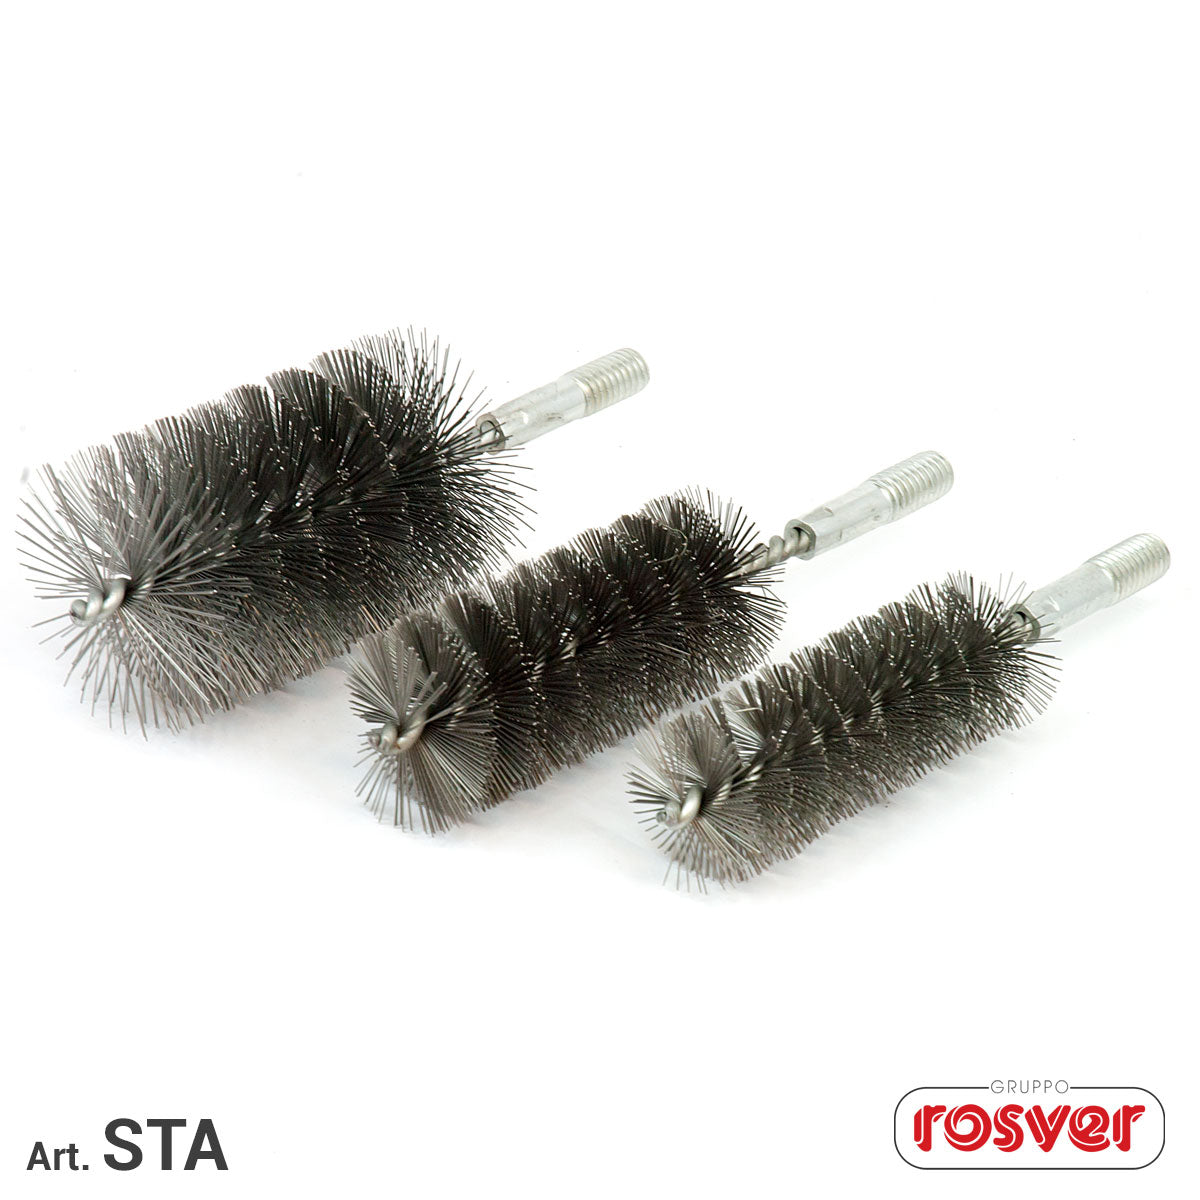 Steel Brushes with Thread Rosver - STA D.20xM6 - Conf.10pz